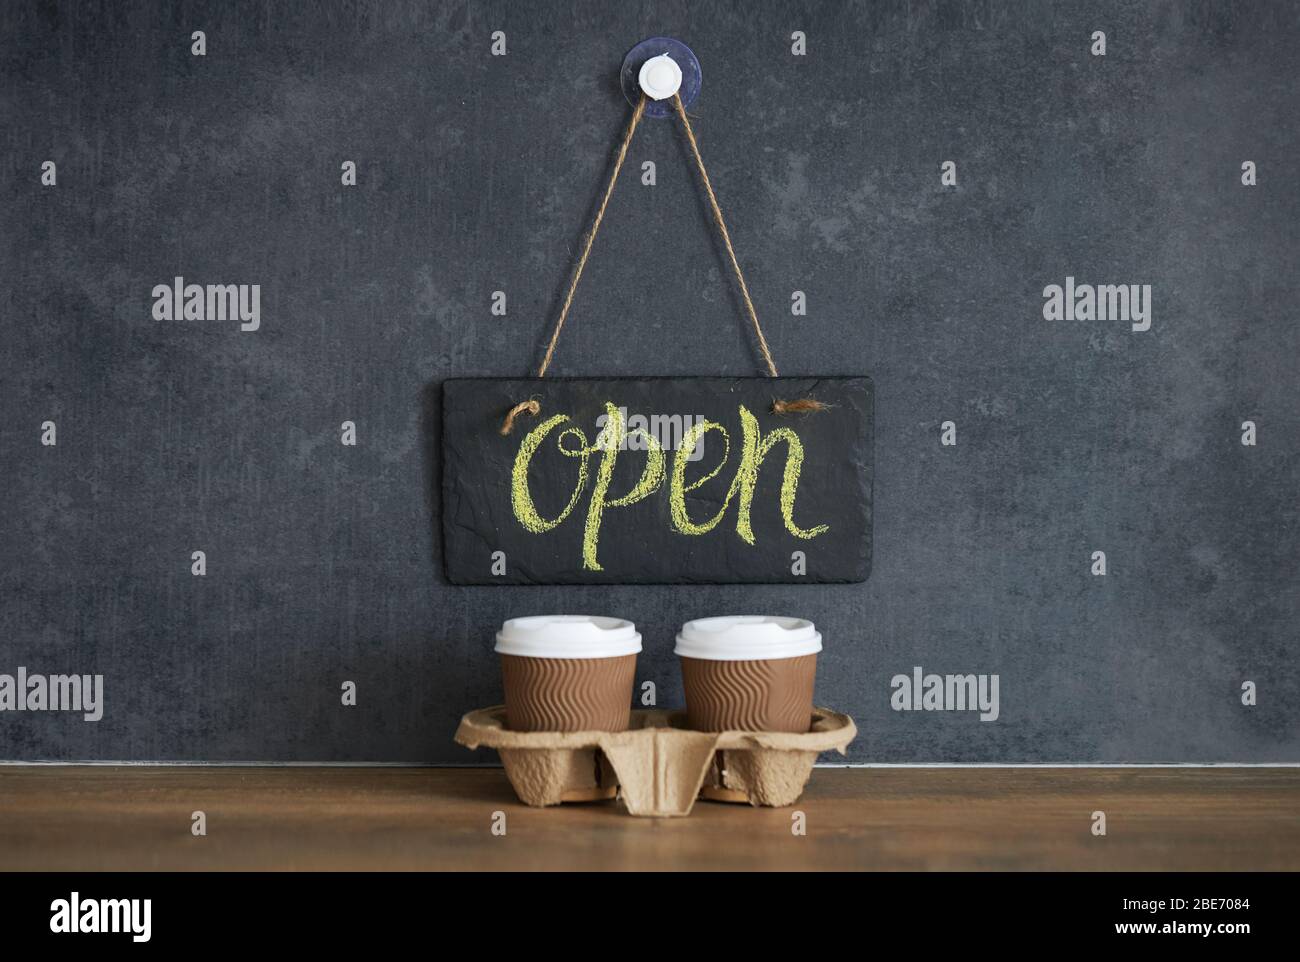 A sign that says Open on cafe, on a black chalk board. After quarantine. Takeaway coffee glasses on dark background. Business opening Stock Photo